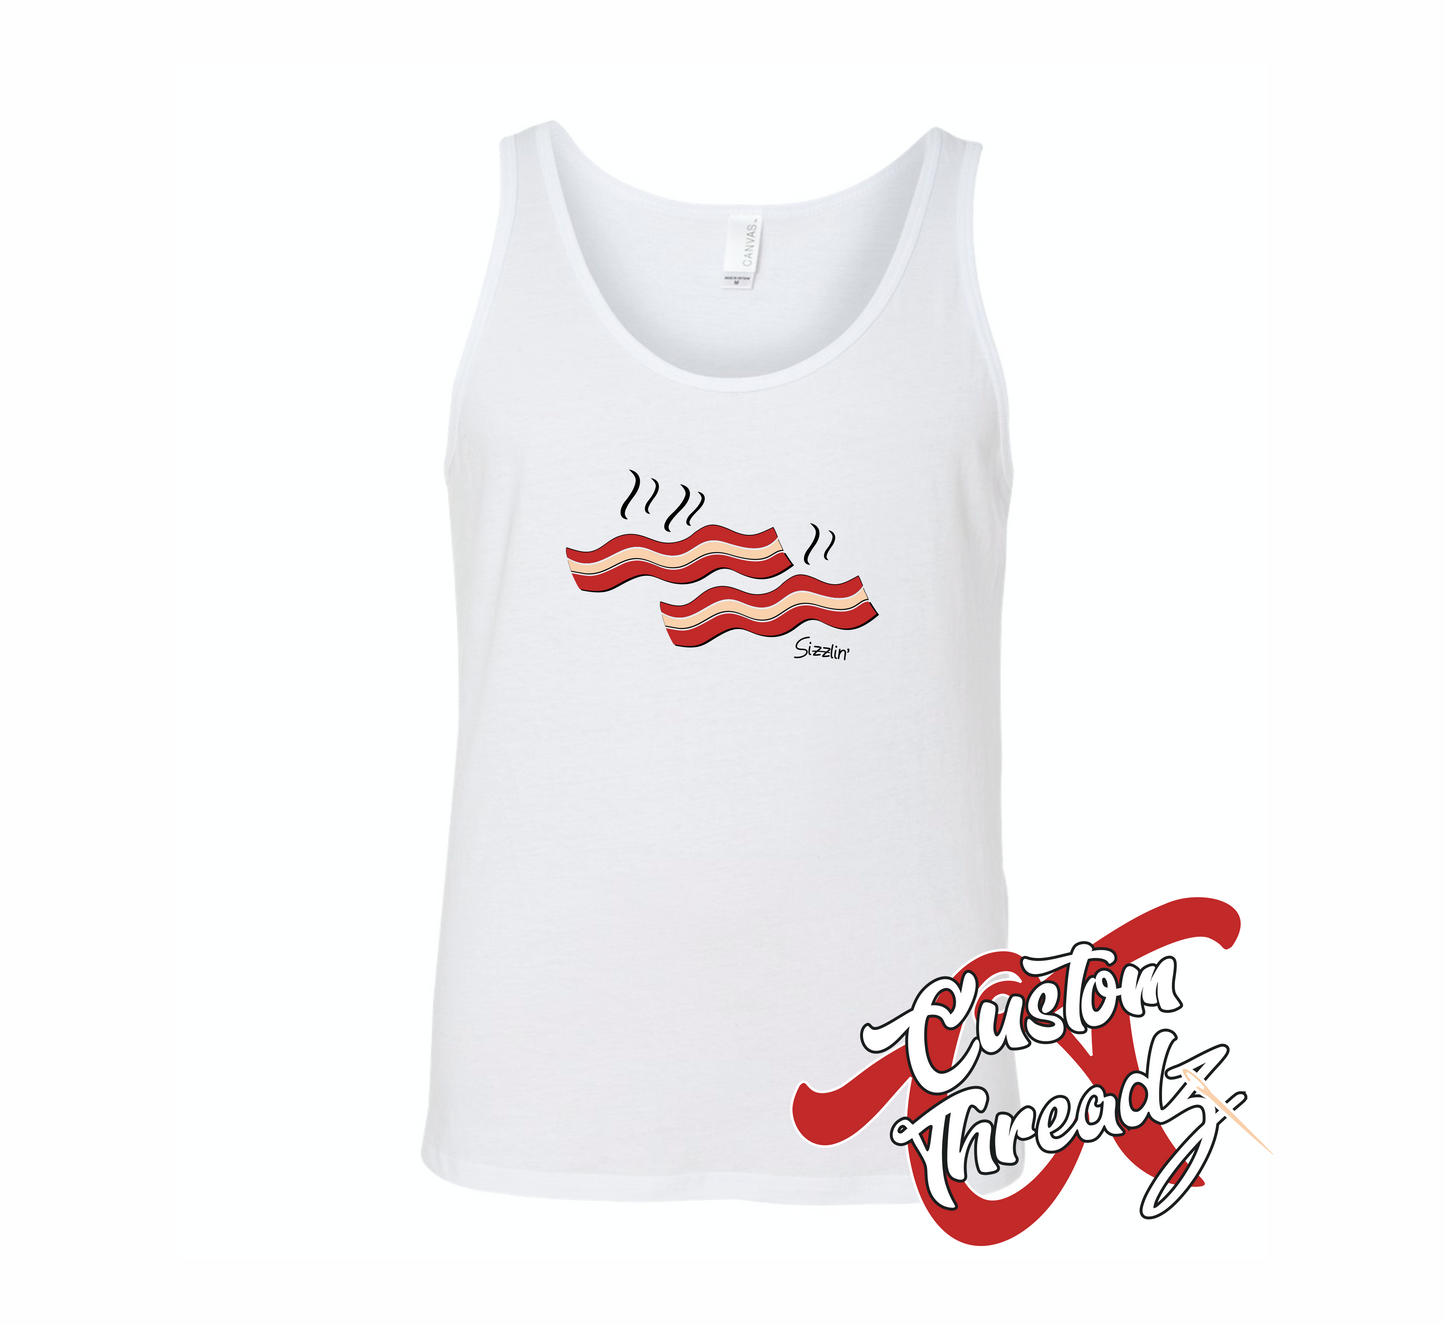 white tank top with sizzlin bacon summer DTG printed design